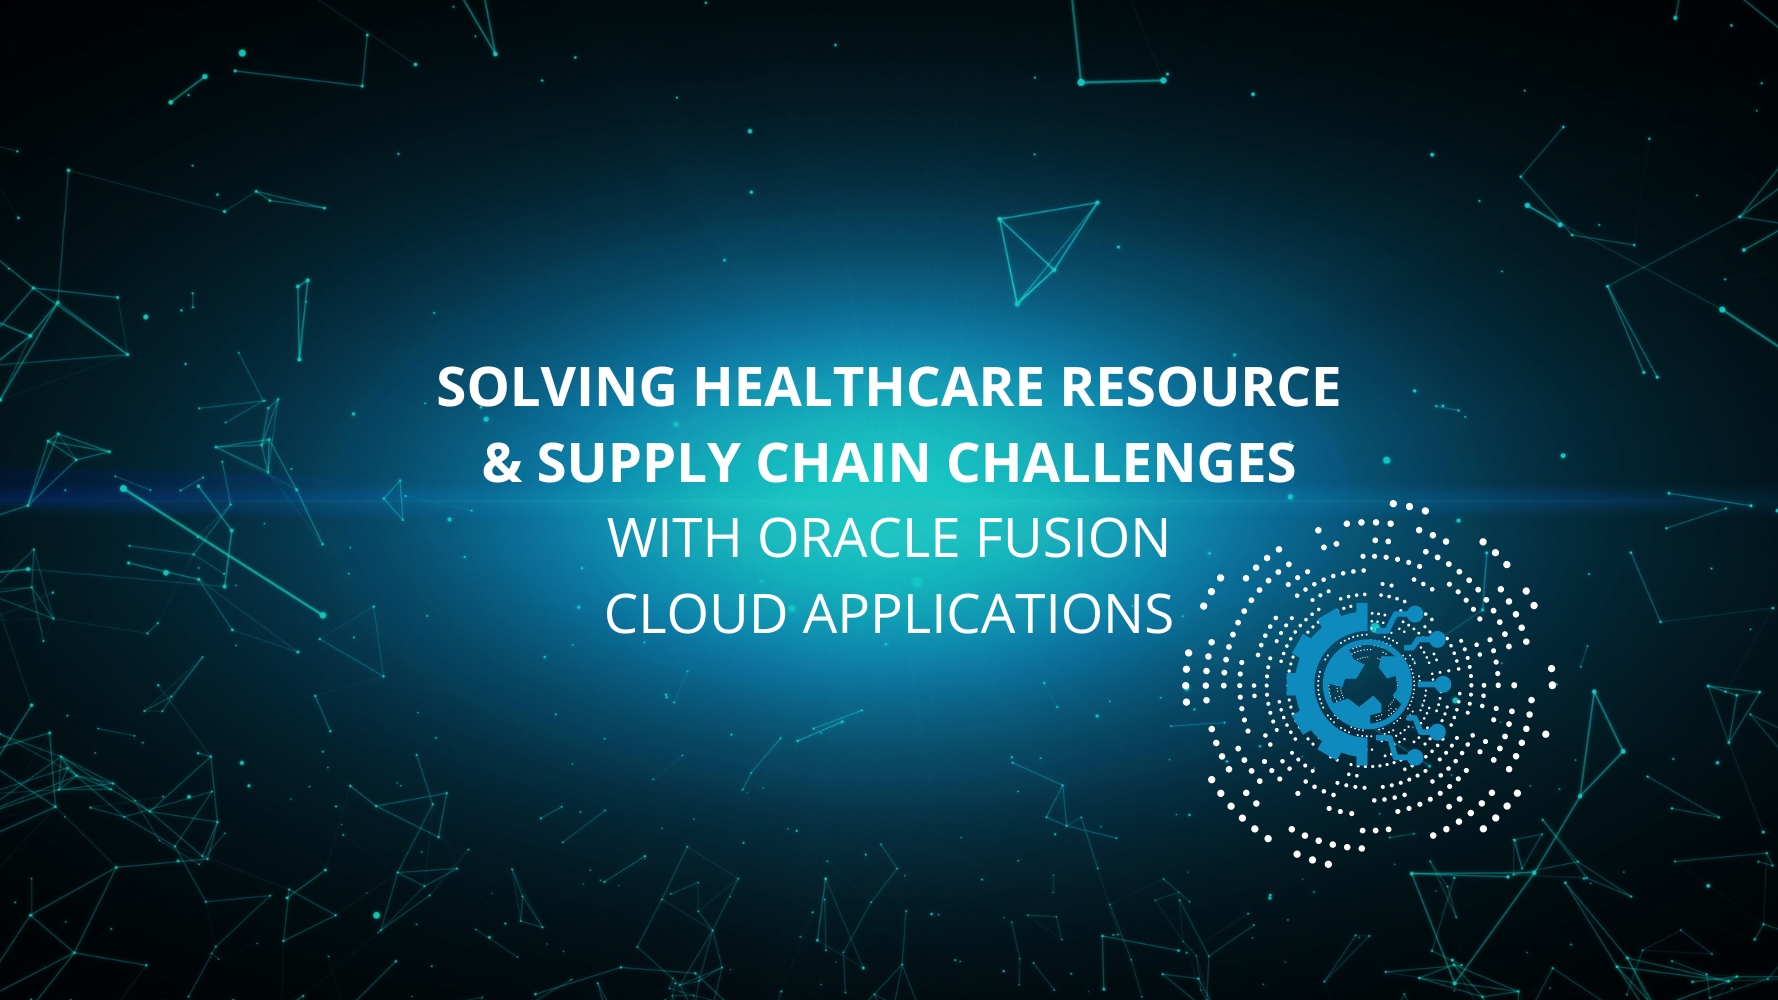 Solving Healthcare Resource & Supply Chain Challenges with Oracle Fusion Cloud Applications.jpg